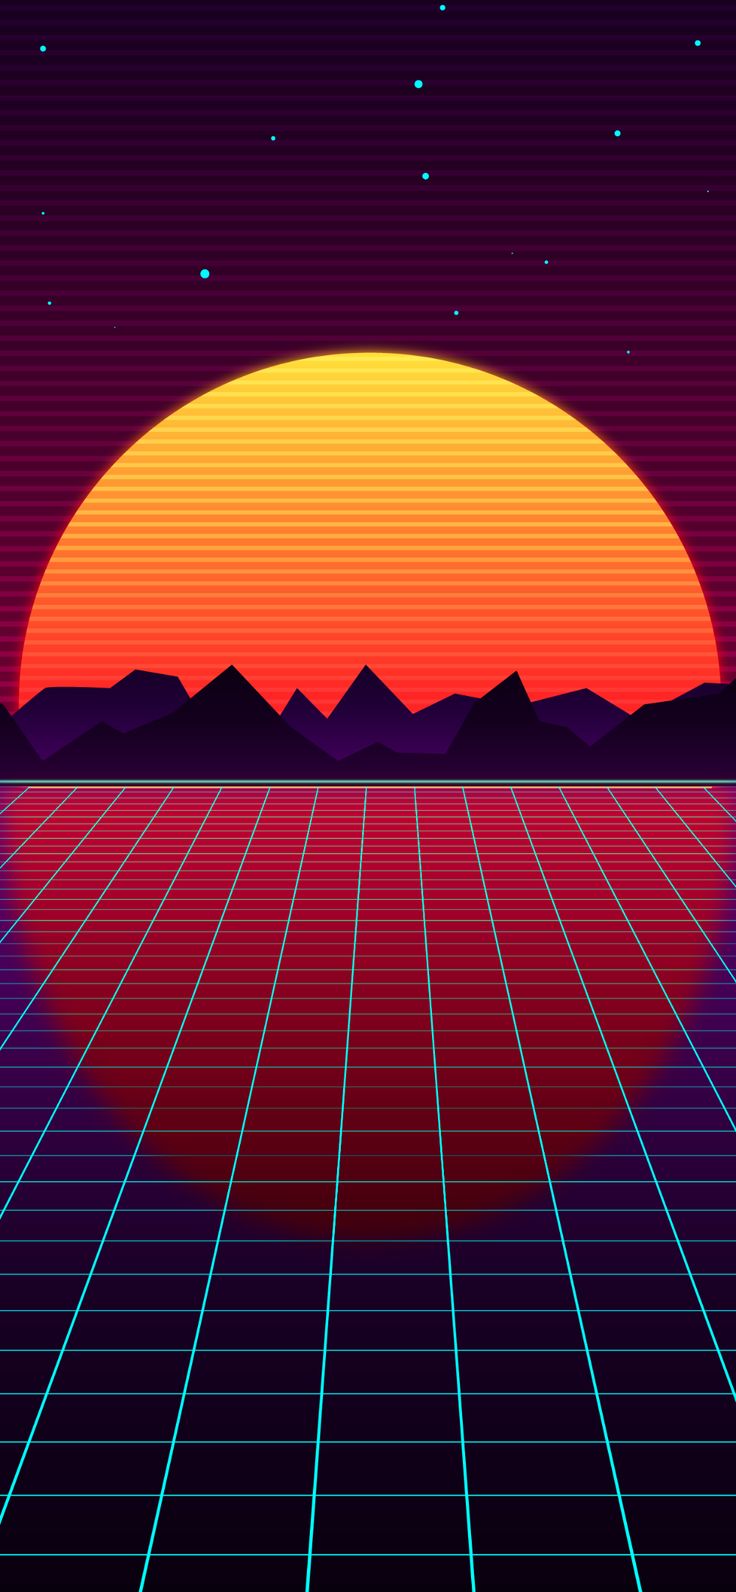 Retro style outrun wallpaper for phone in HD. HeroScreen Wallpaper. Phone wallpaper, Vaporwave wallpaper, Wallpaper